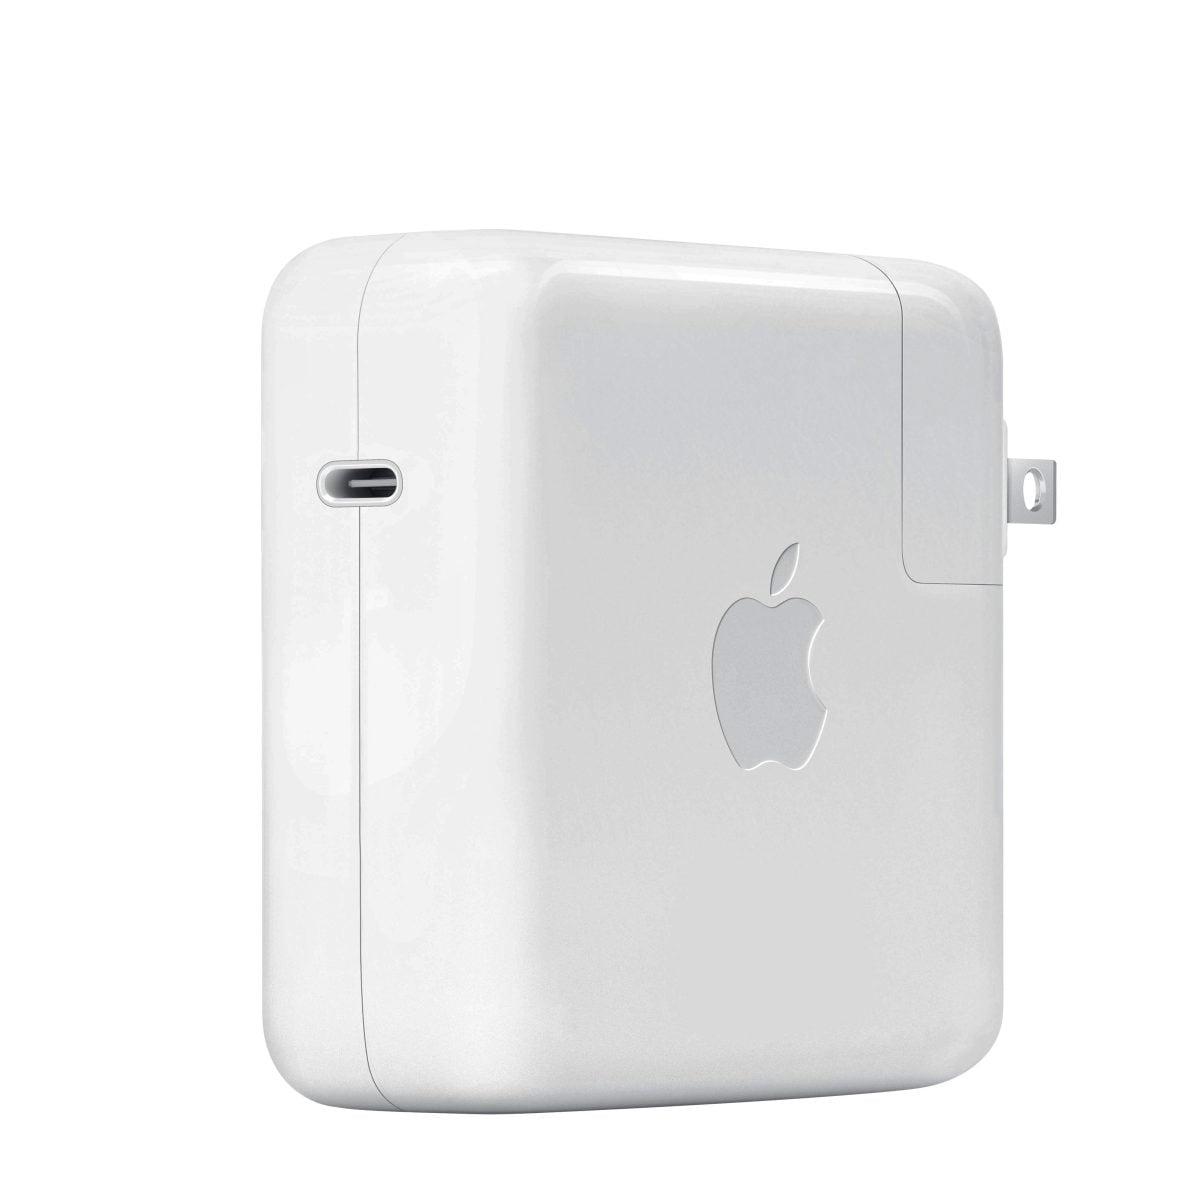 Apple - 67W Usb-C Power Adapter For 13-Inch Macbook Pro (2016 And Later) Or 14-Inch Macbook Pro - White